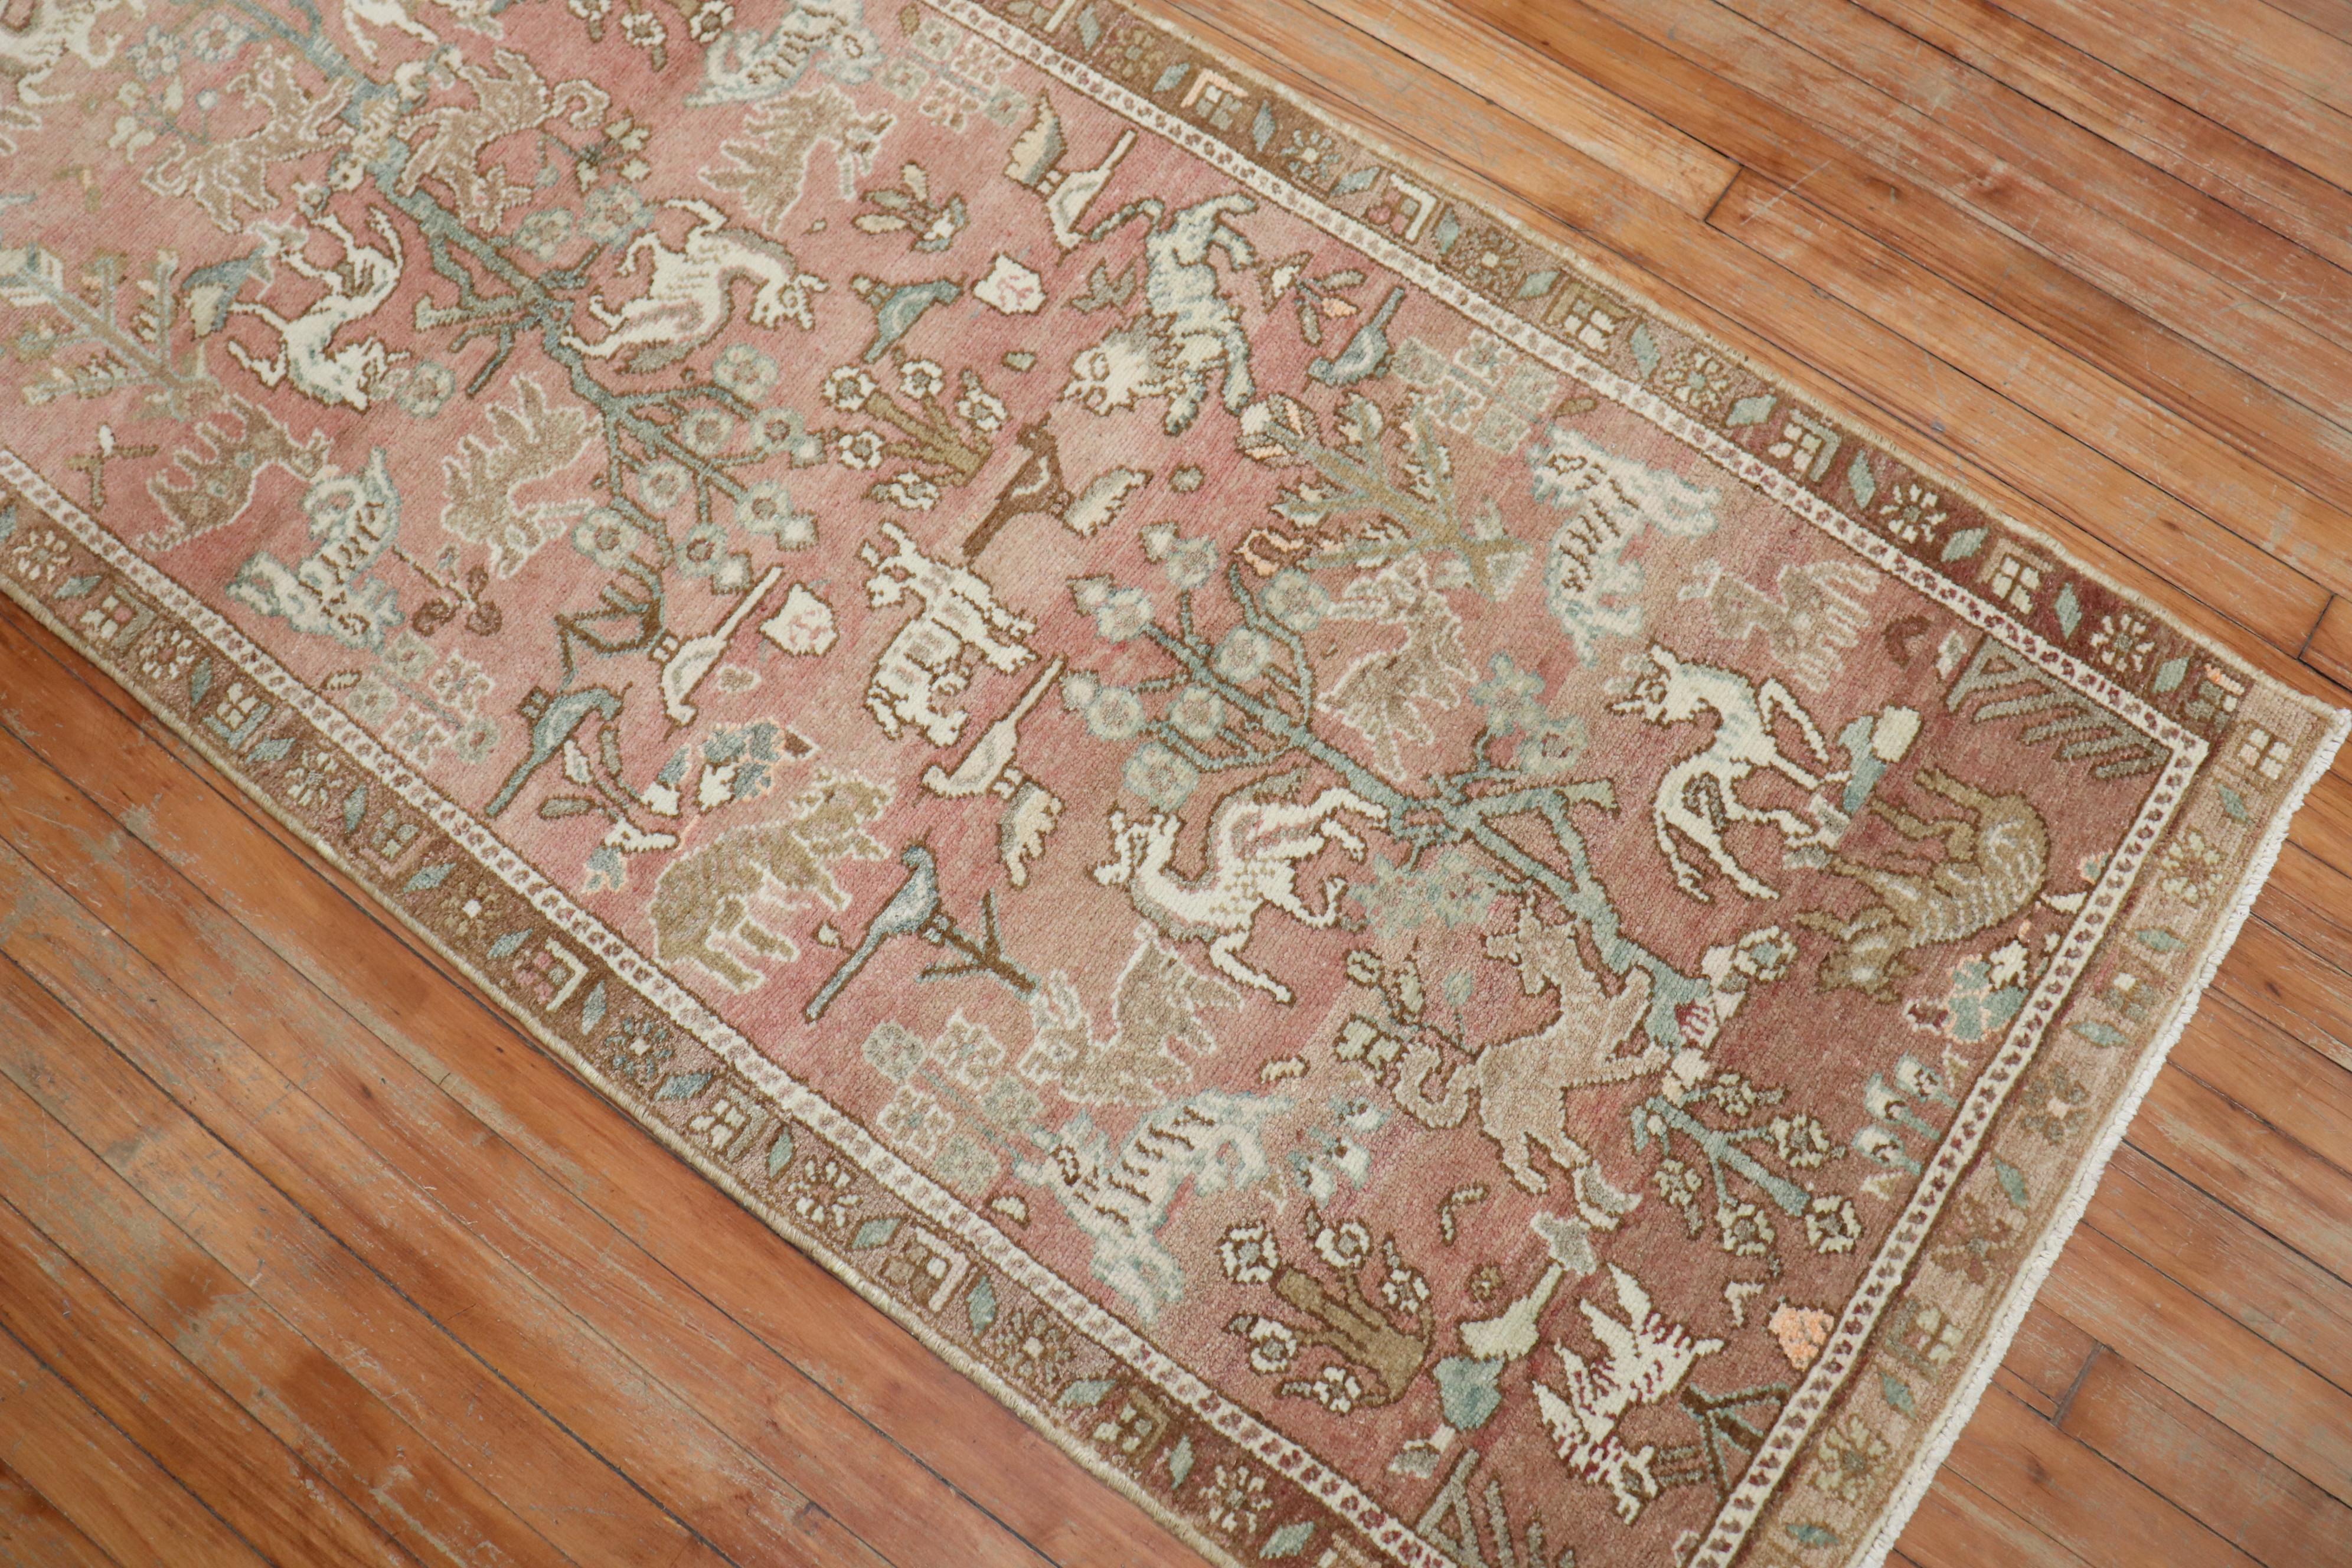 Hand-Woven Persian Animal Pictorial Pink Color Runner For Sale